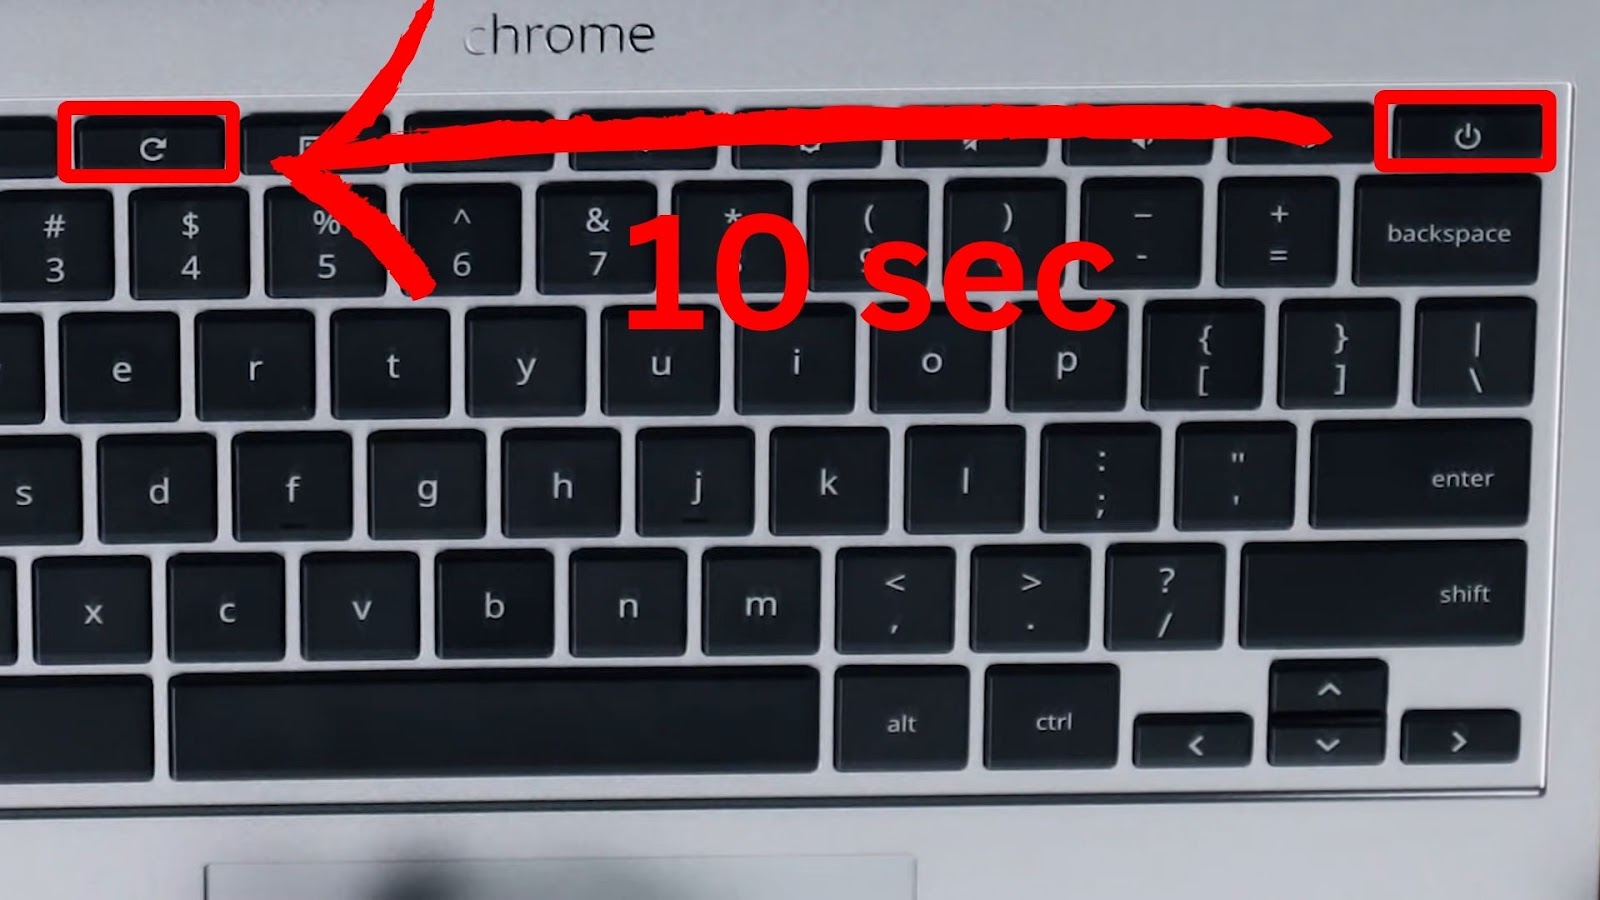 Hold the Power and Refresh Keys to Charge the Chromebook